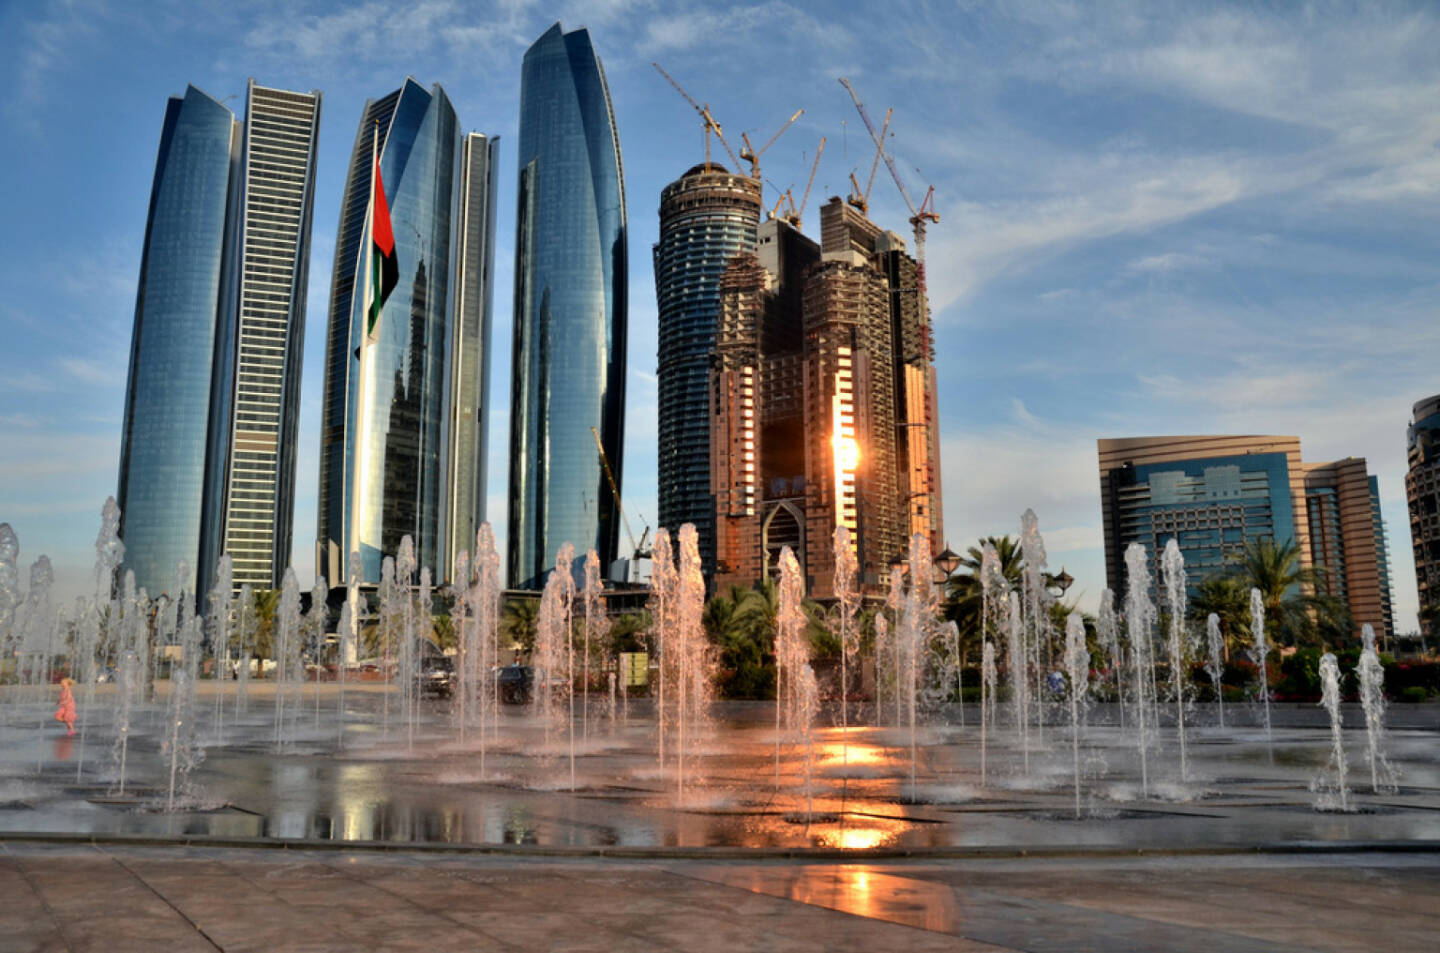 Abu Dhabi, Vereinigte Arabische Emirate, http://www.shutterstock.com/de/pic-150639650/stock-photo-the-fountain-on-the-background-of-skyscrapers-in-abu-dhabi-united-arab-emirates.html